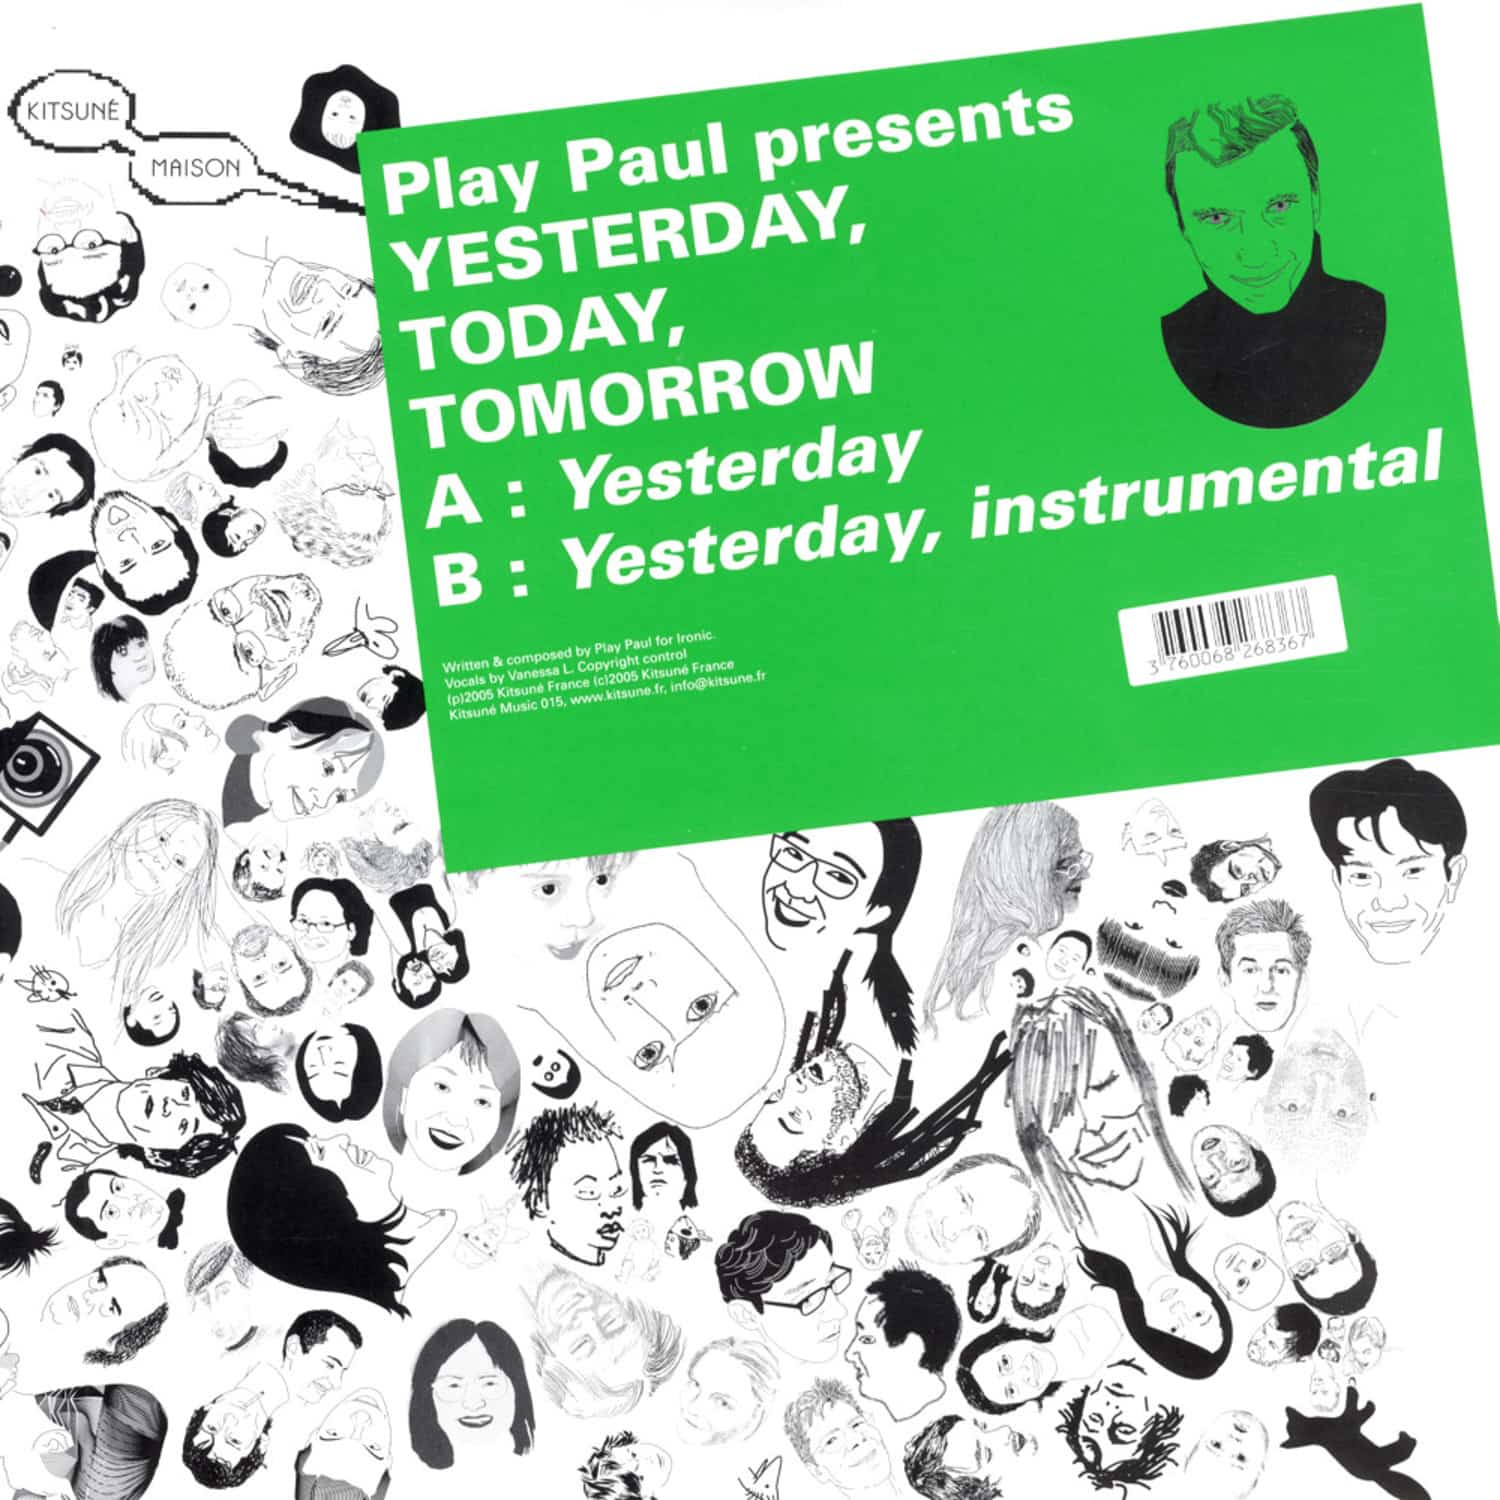 Play Paul - YESTERDAY, TODAY, TOMORROW